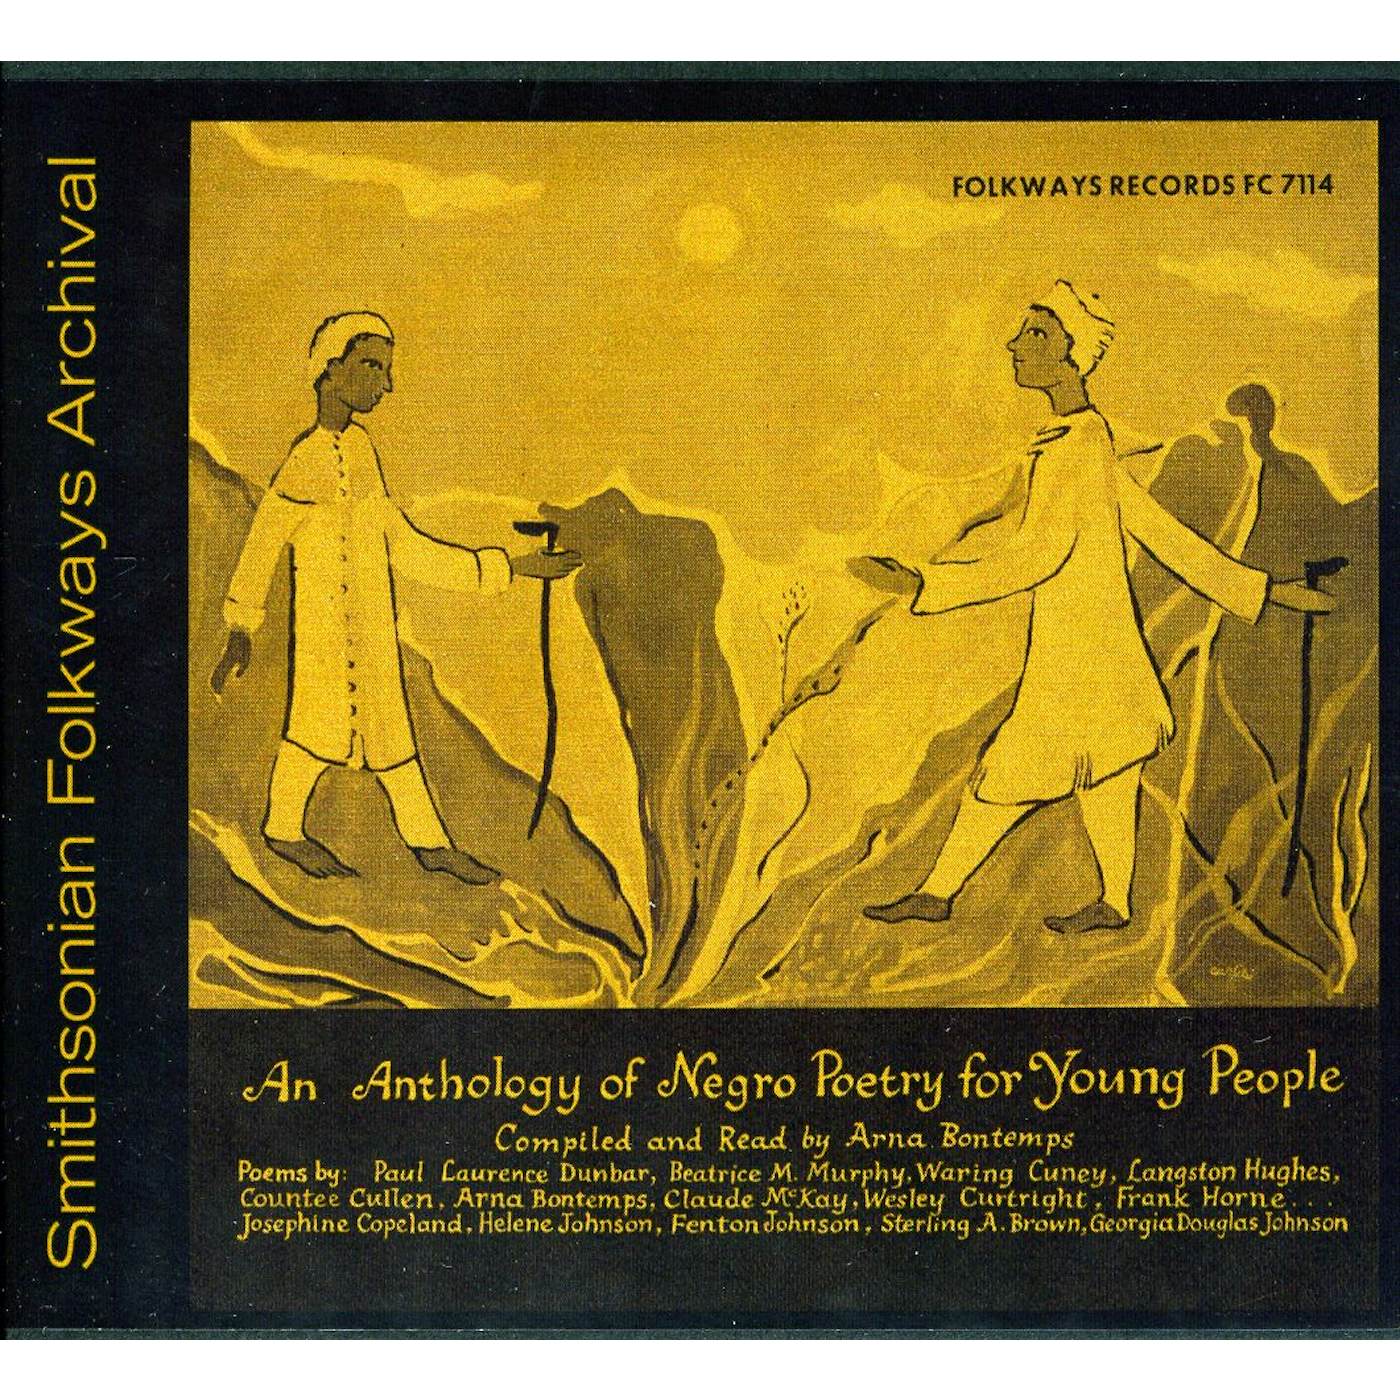 Arna Bontemps AN ANTHOLOGY OF AFRICAN AMERICAN POETRY CD